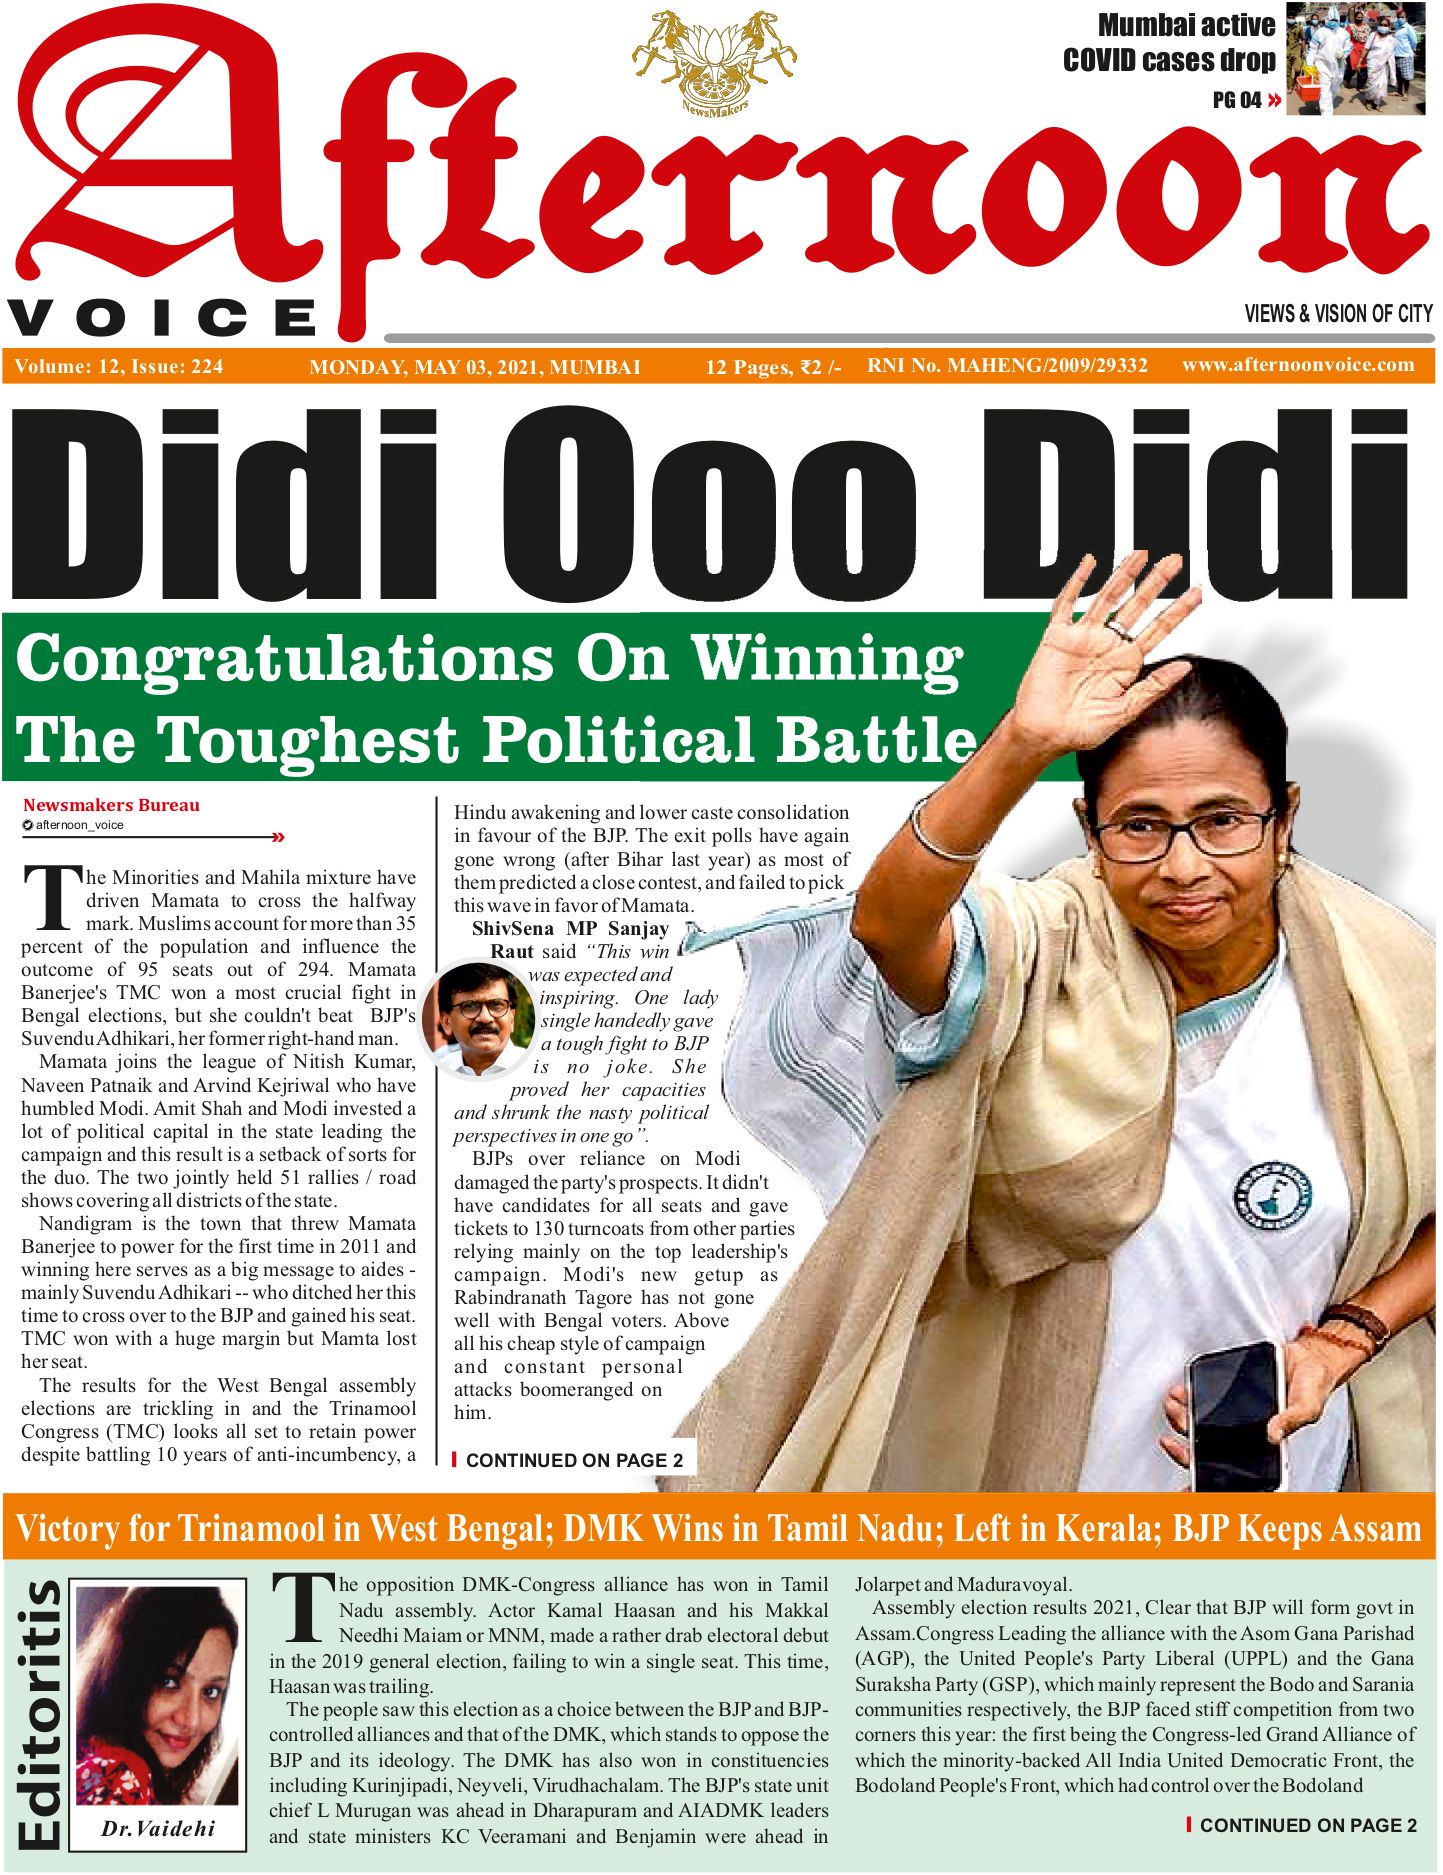 03 May 21 Page 1 Online English News Paper Daily News Epaper Today Newspaper